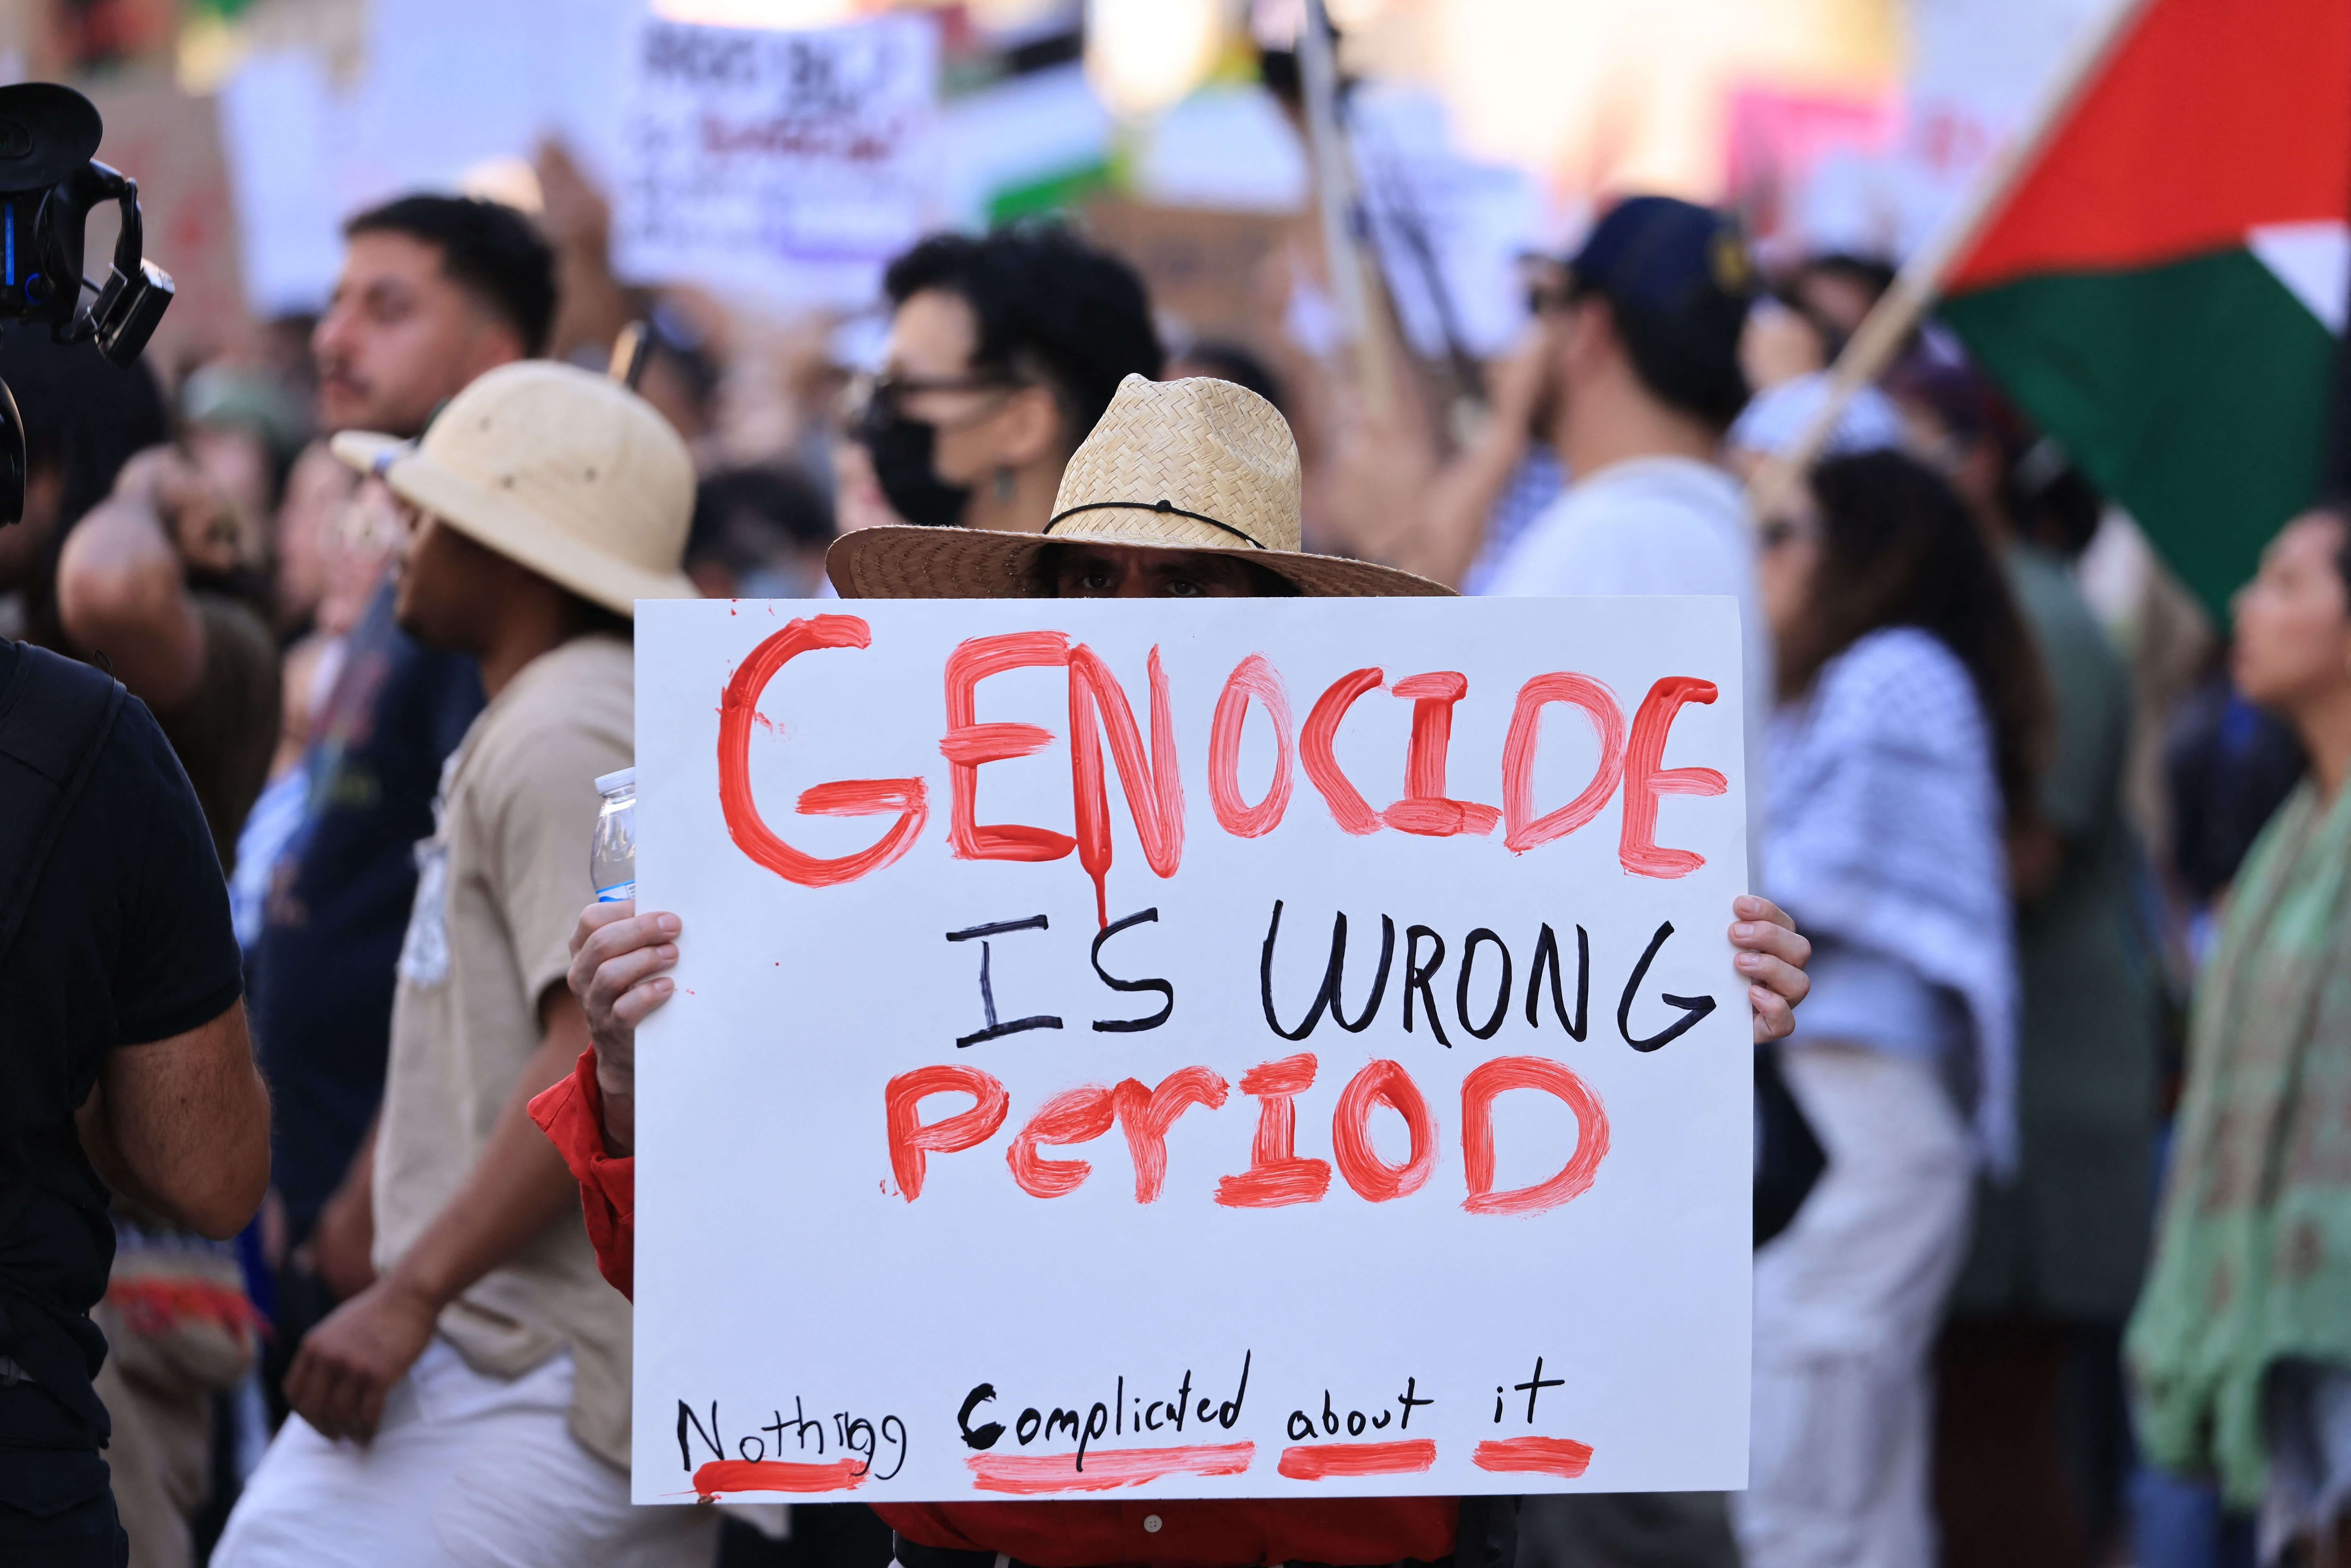 A protestor holds a "Genocide is Wrong, Period" sign at a rally in Los Angeles.